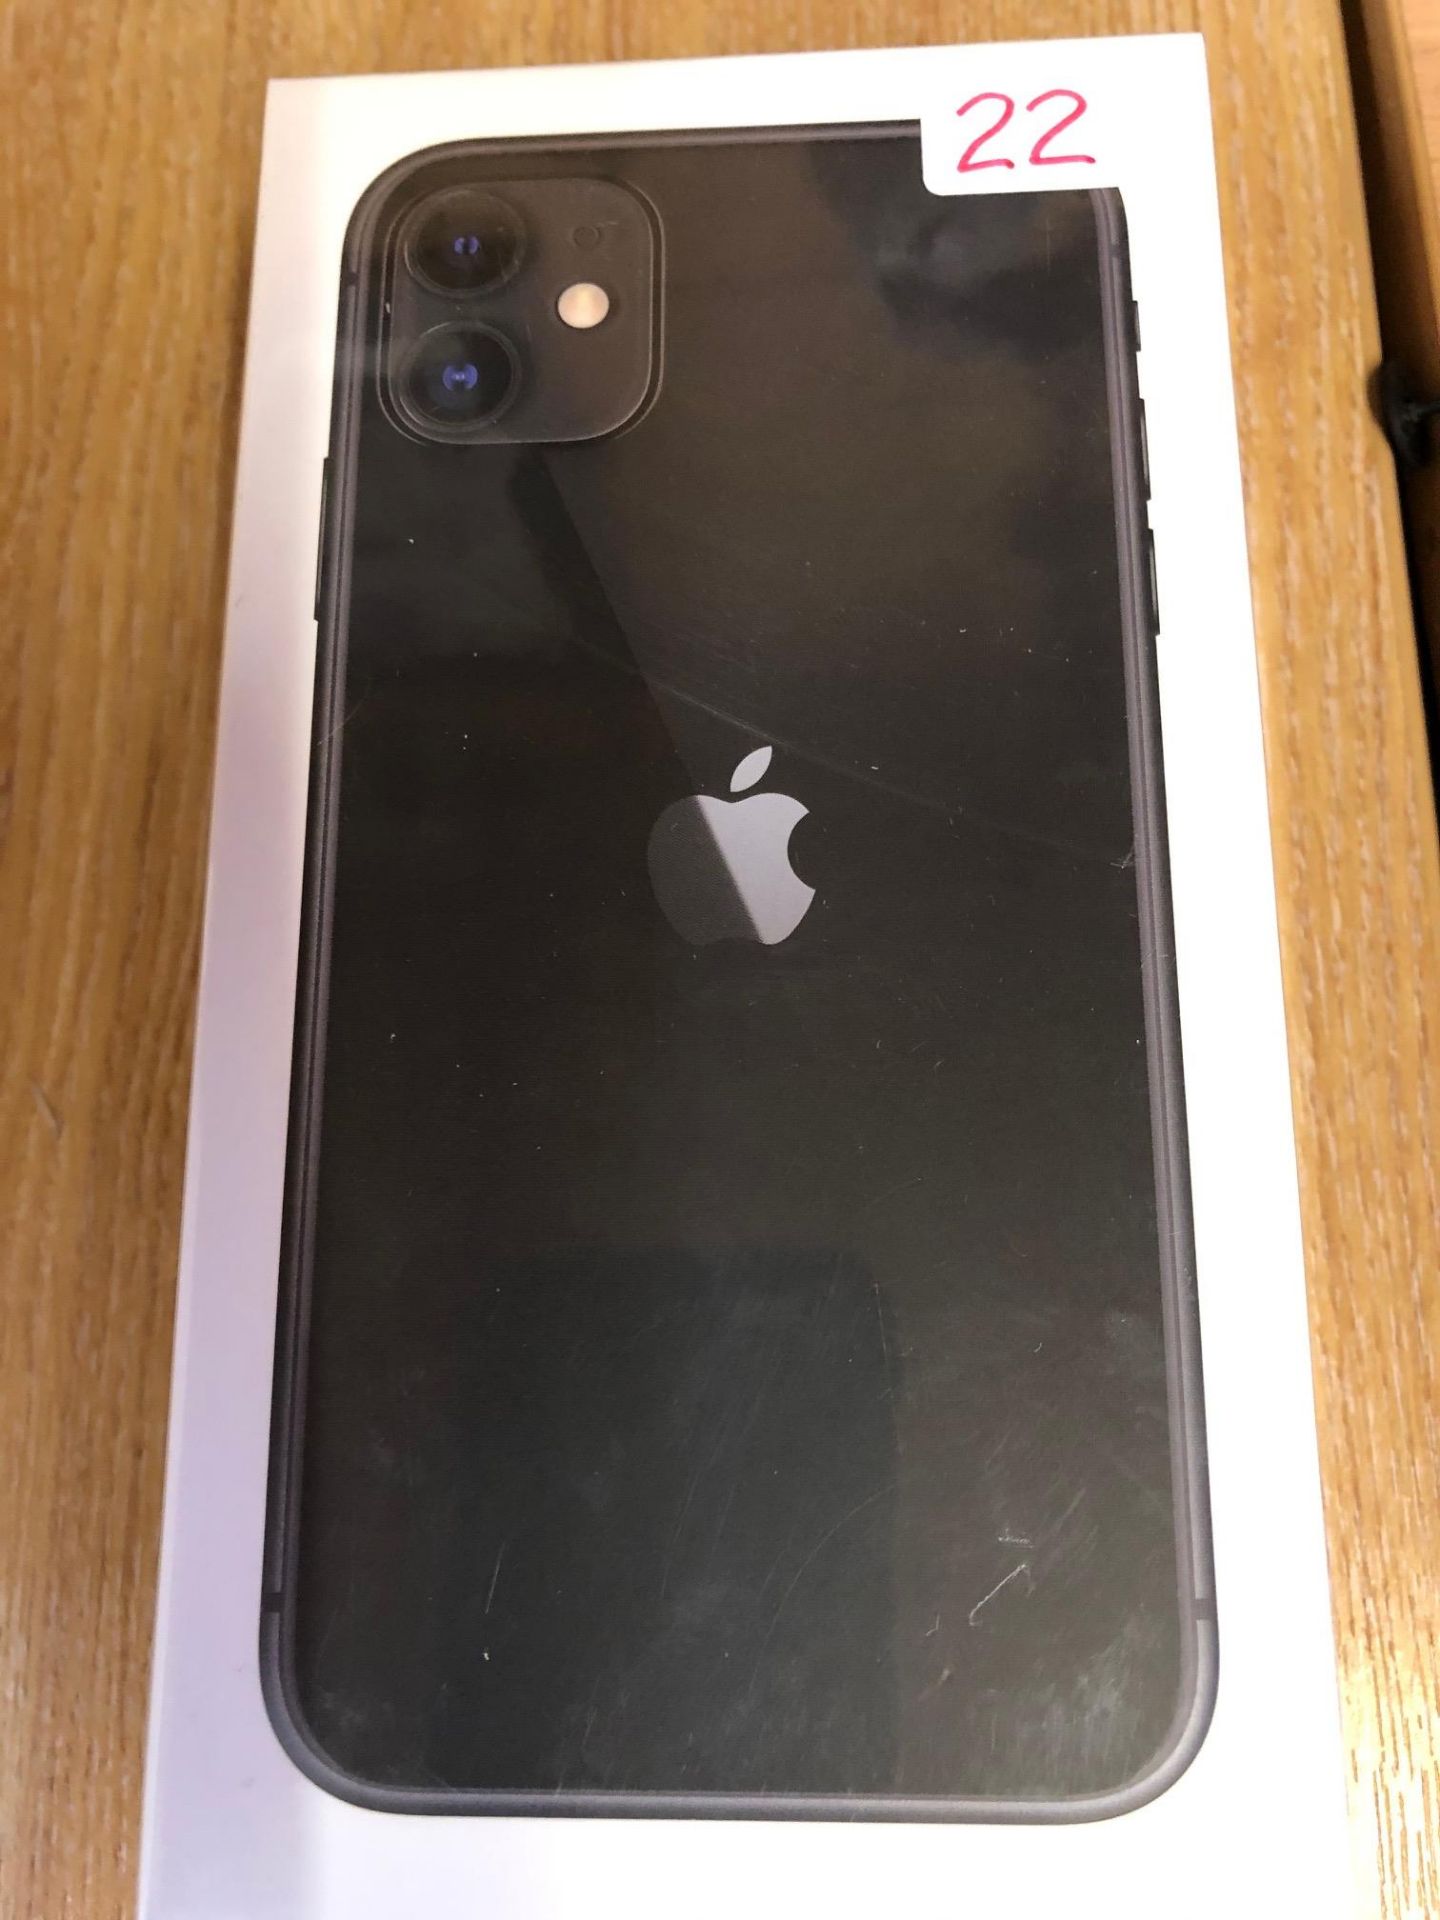 Apple iPhone 11 Black 64Gb Unused unopened & boxed in original cellophane to include Earpods with - Image 3 of 4